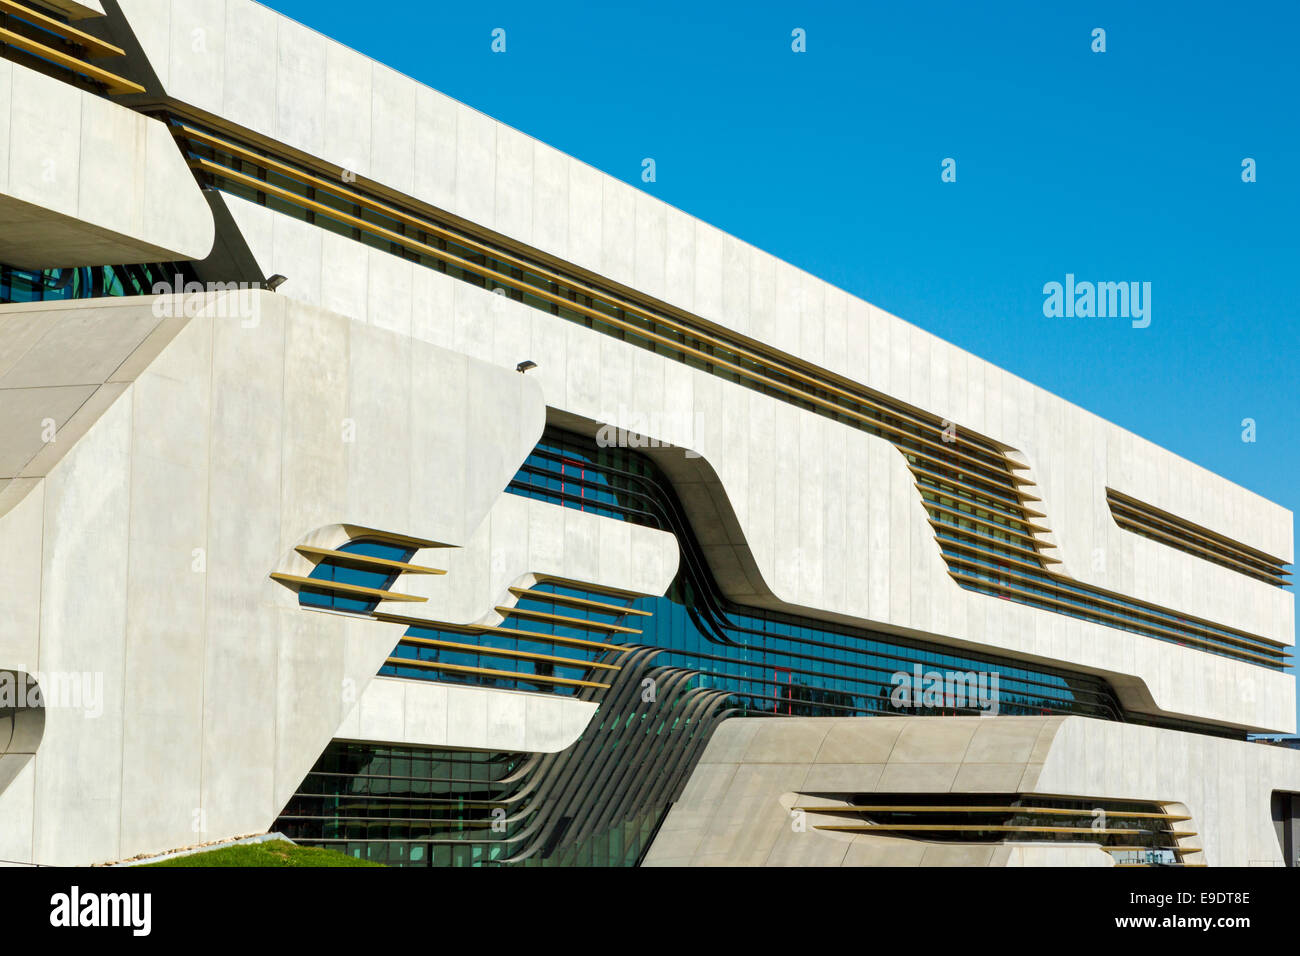 Pierrevives, Multimedia,library by Zaha Hadid, Montpellier, Herault, France Stock Photo